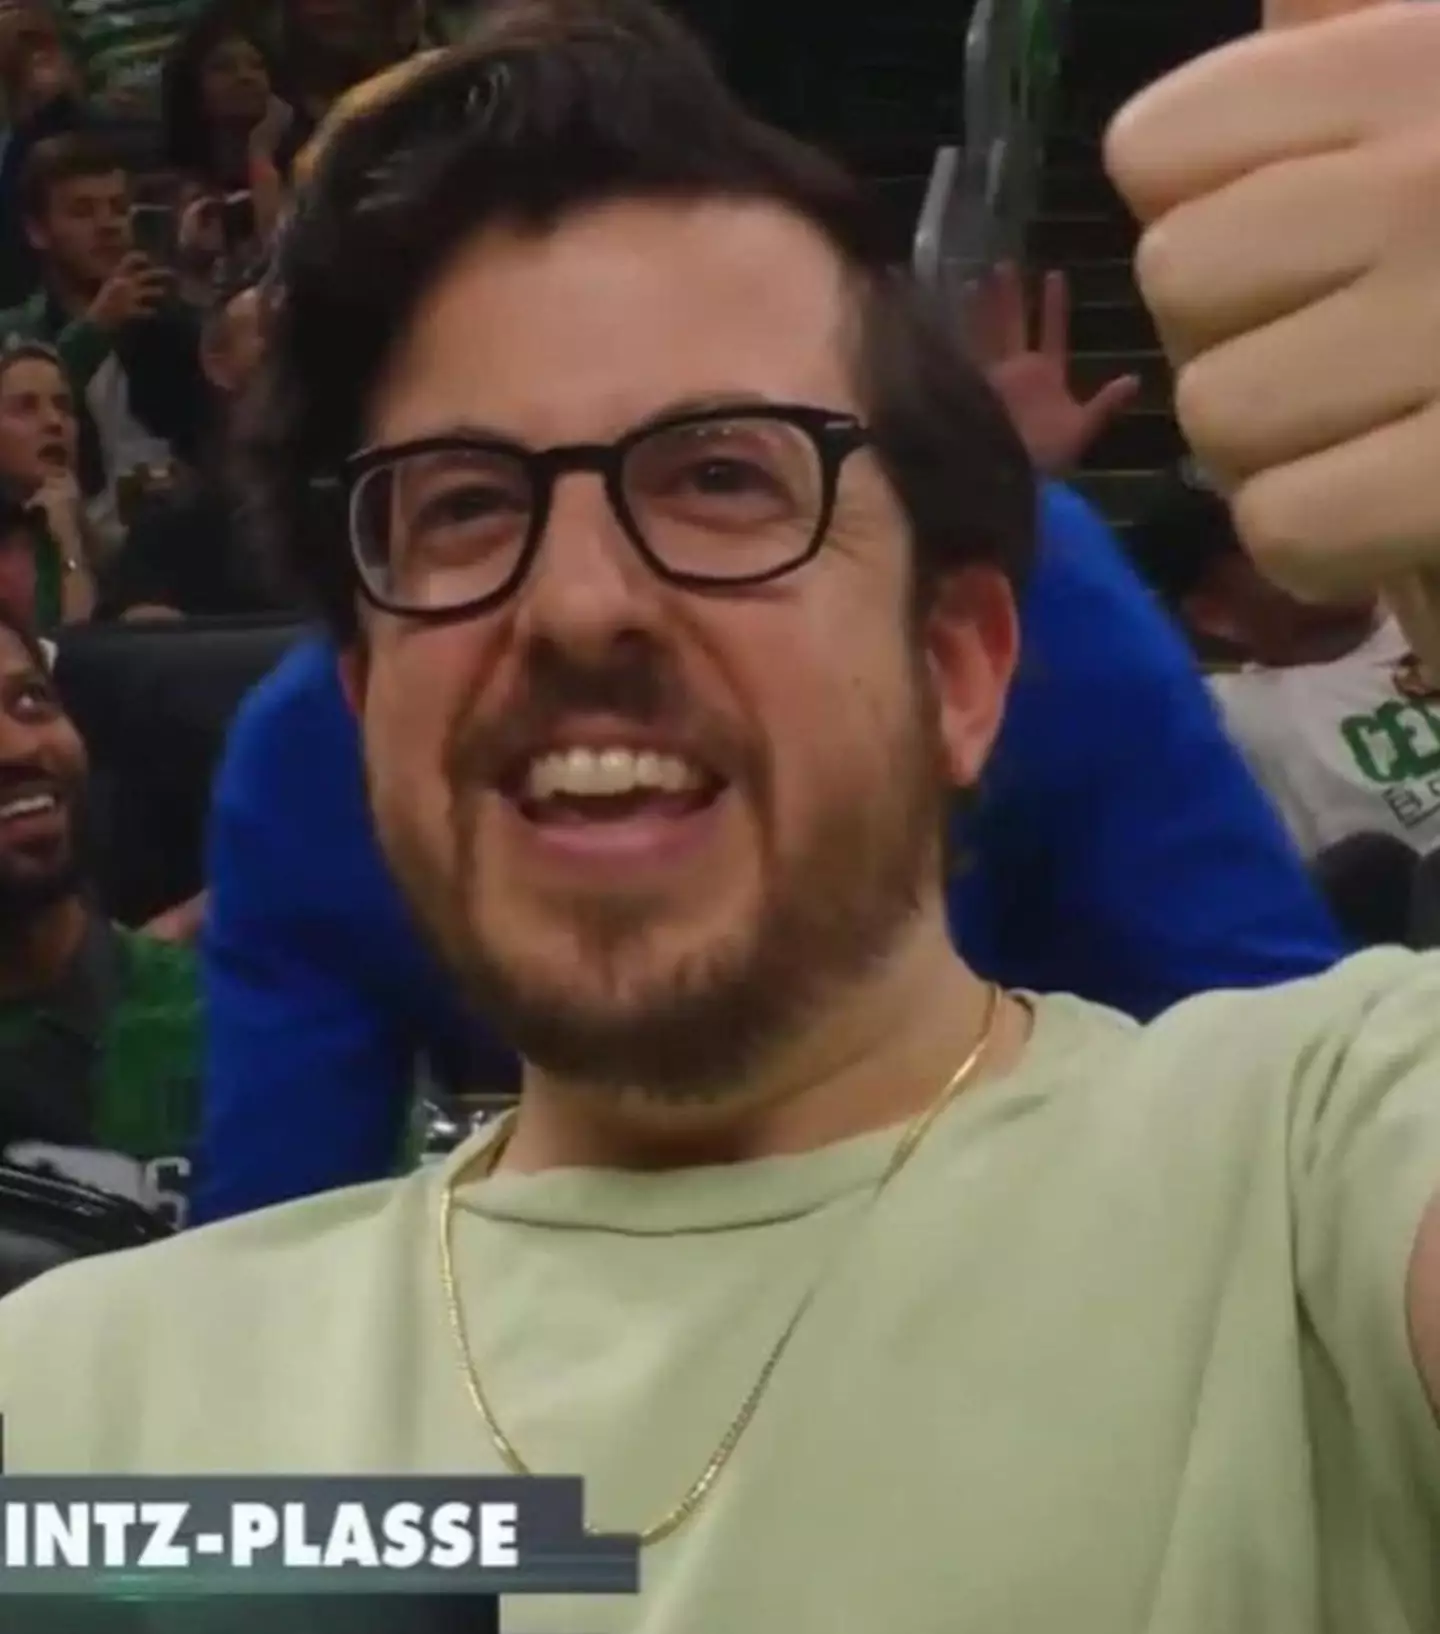 Christopher Mintz-Plasse was at a basketball game this weekend.